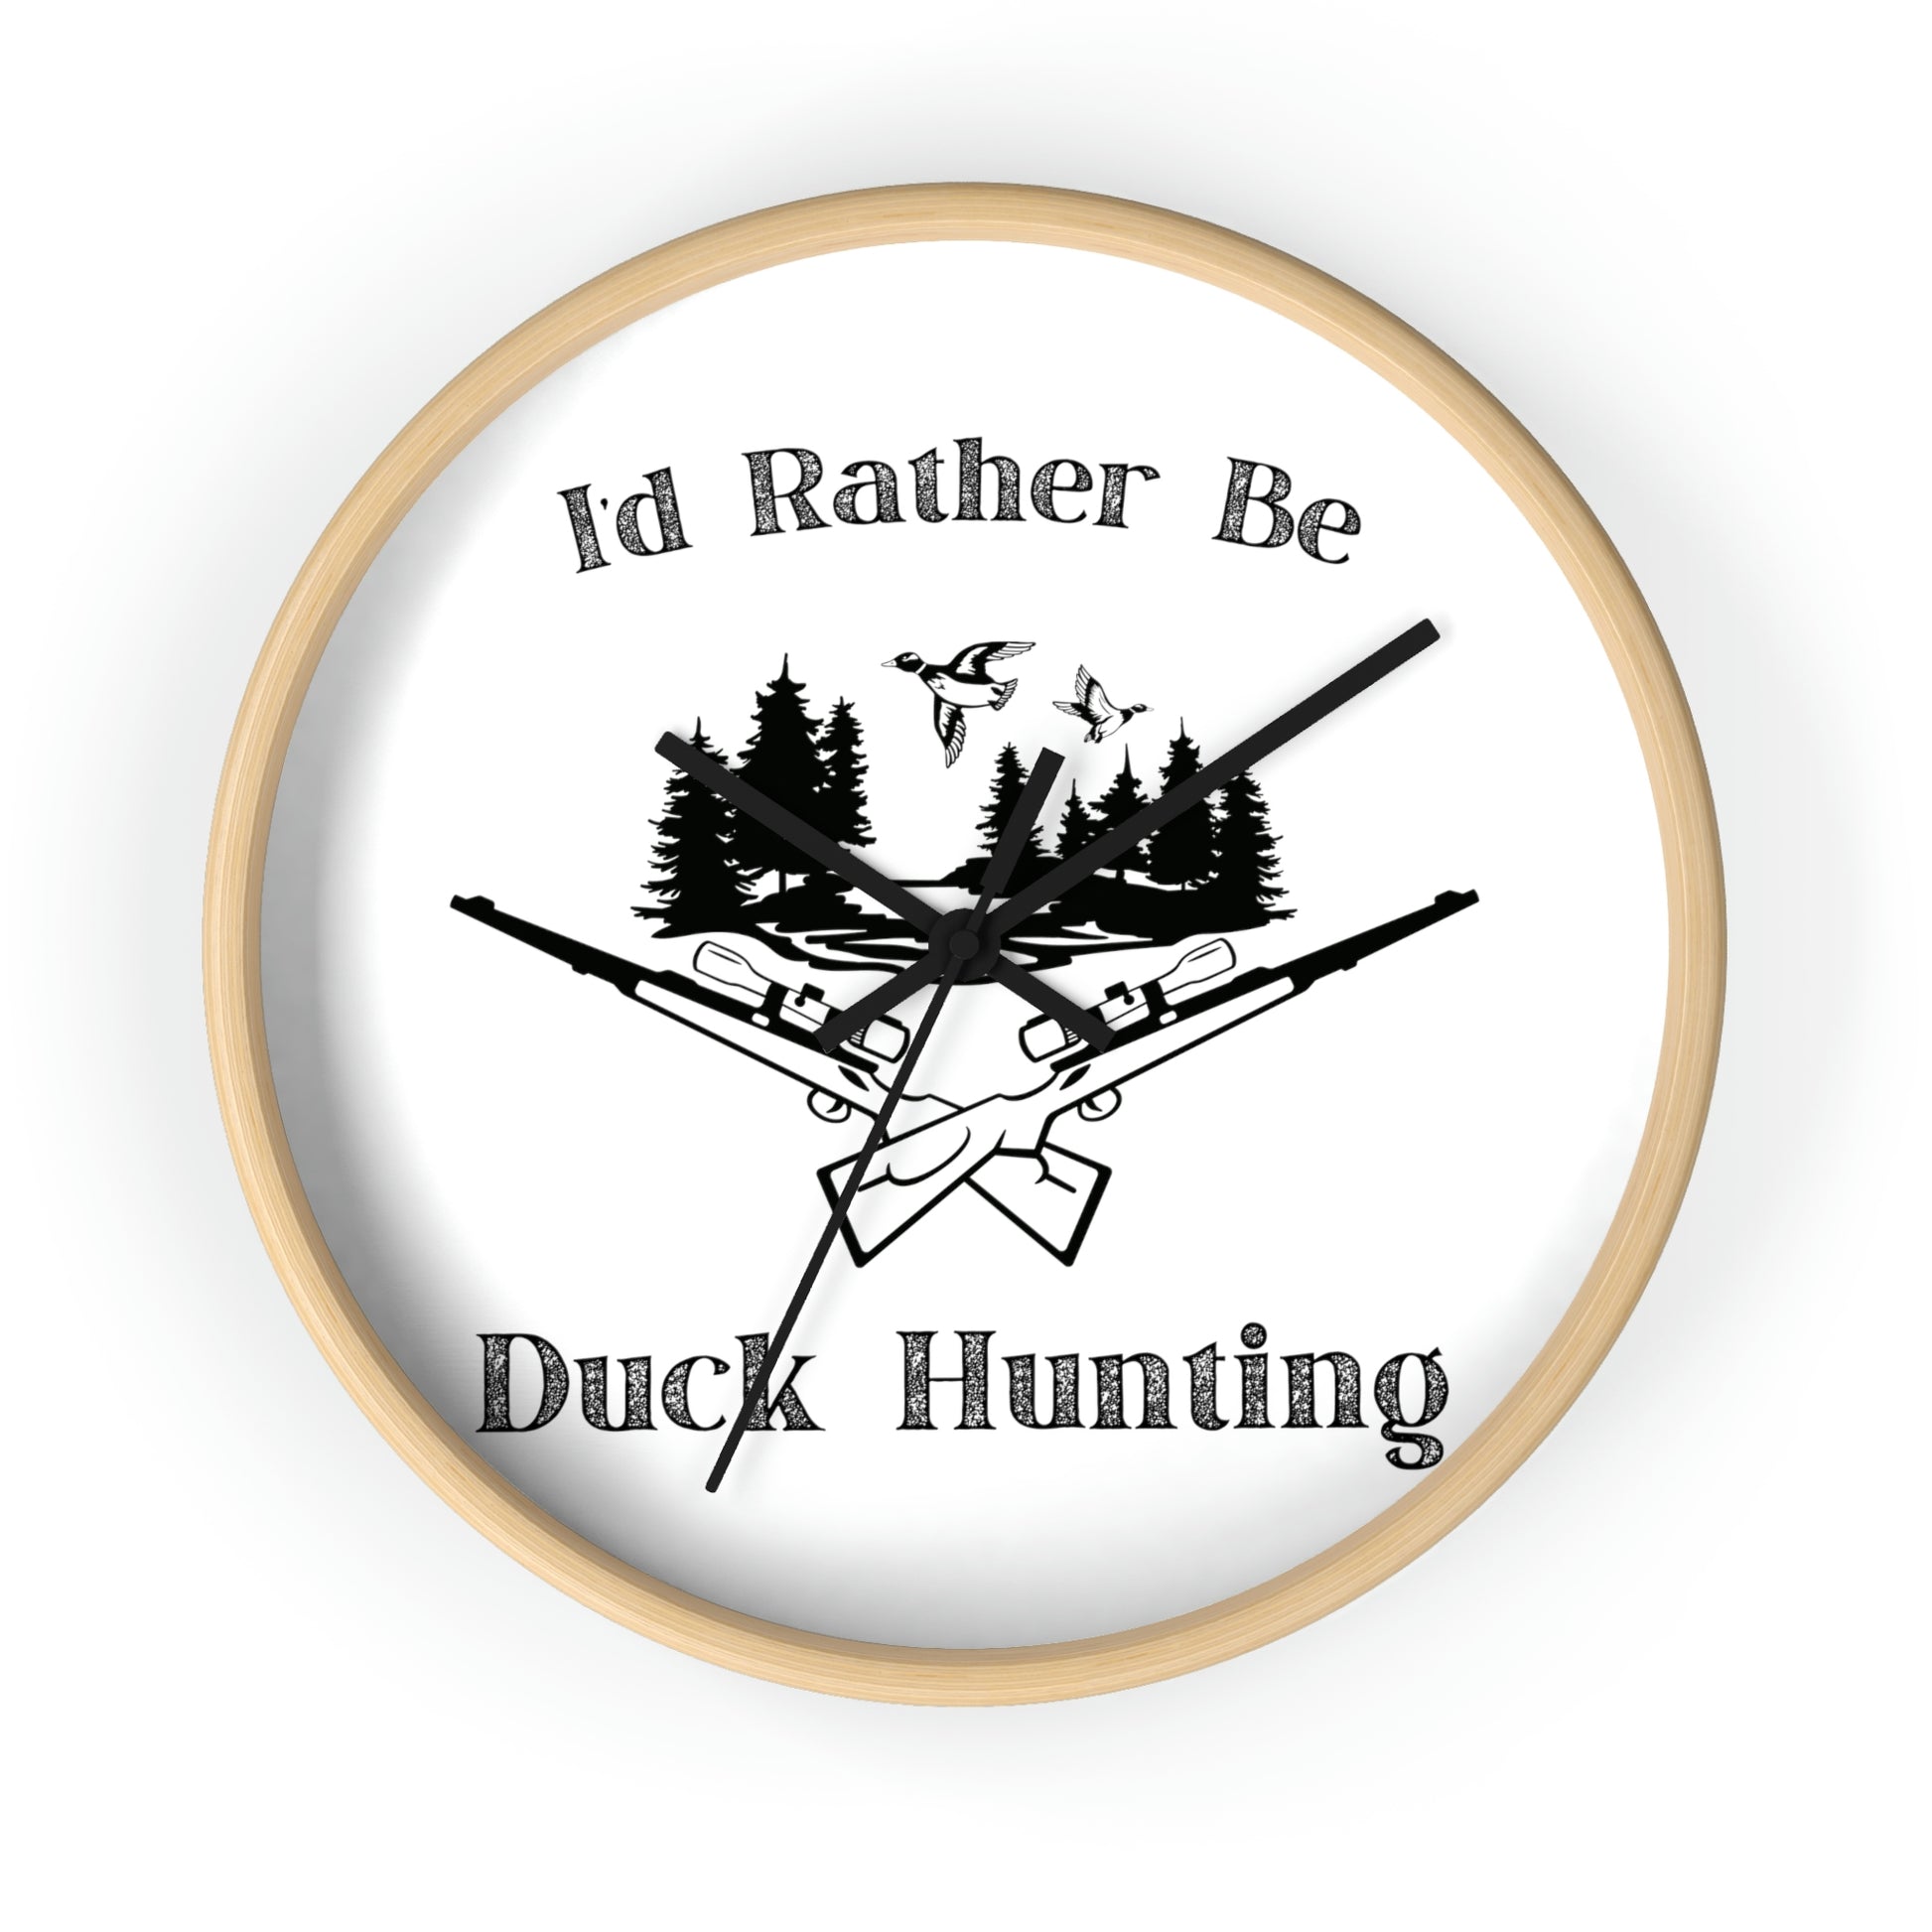 “I’d Rather Be Duck Hunting” Clock - Weave Got Gifts - Unique Gifts You Won’t Find Anywhere Else!